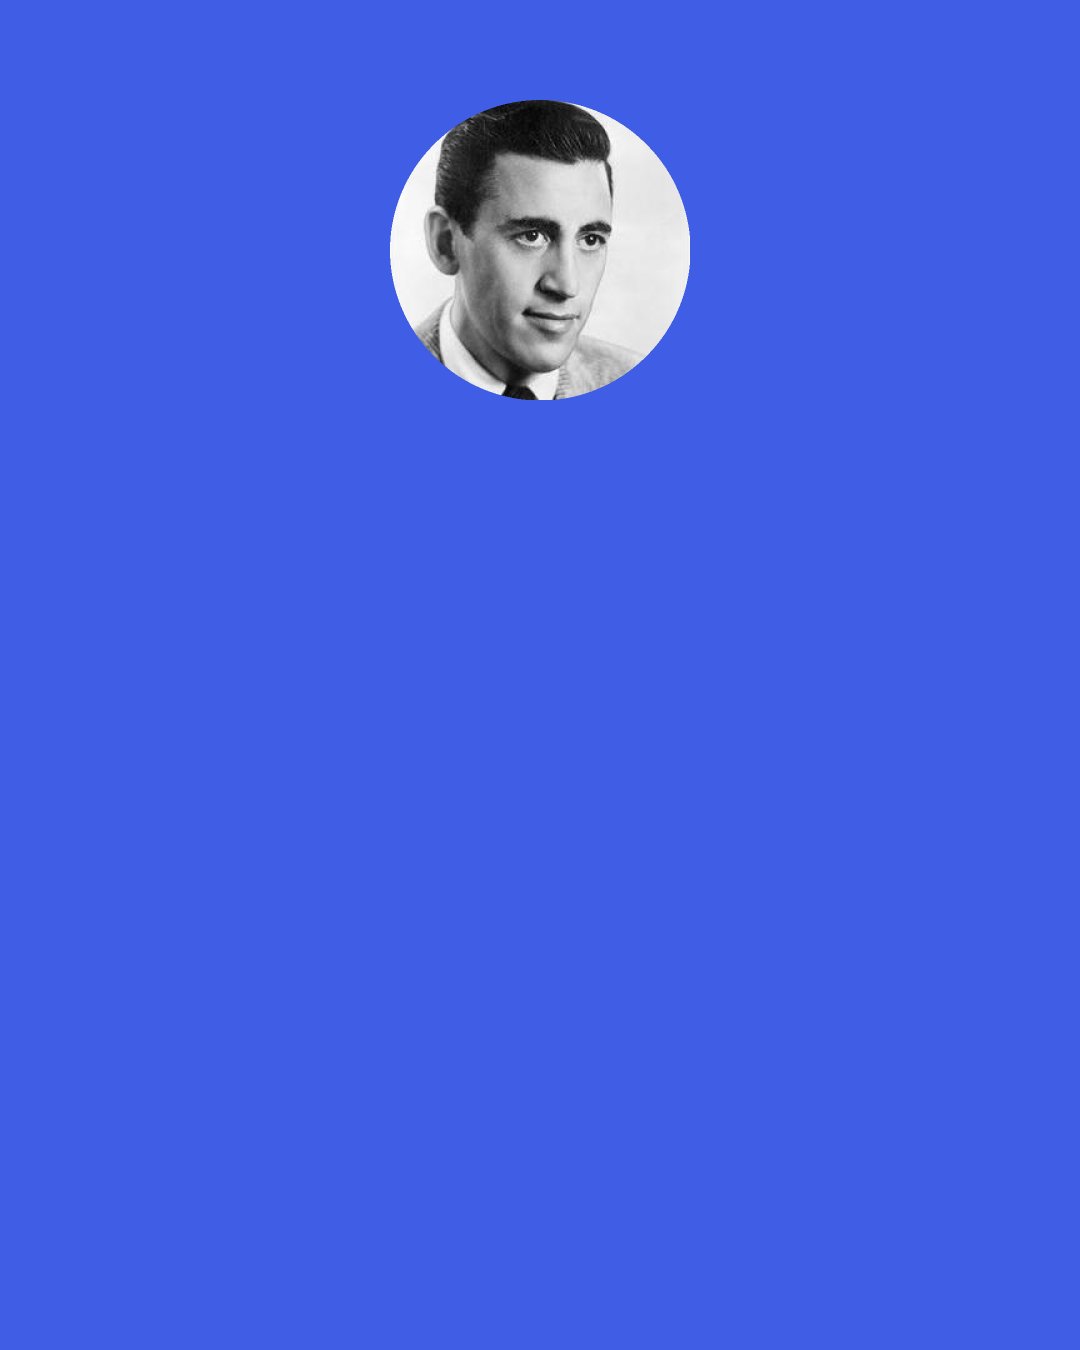 J. D. Salinger: I’m just sick of ego, ego, ego. My own and everybody else’s. I’m sick of everybody that wants to get somewhere, do something distinguished and all, be somebody interesting. It’s disgusting.